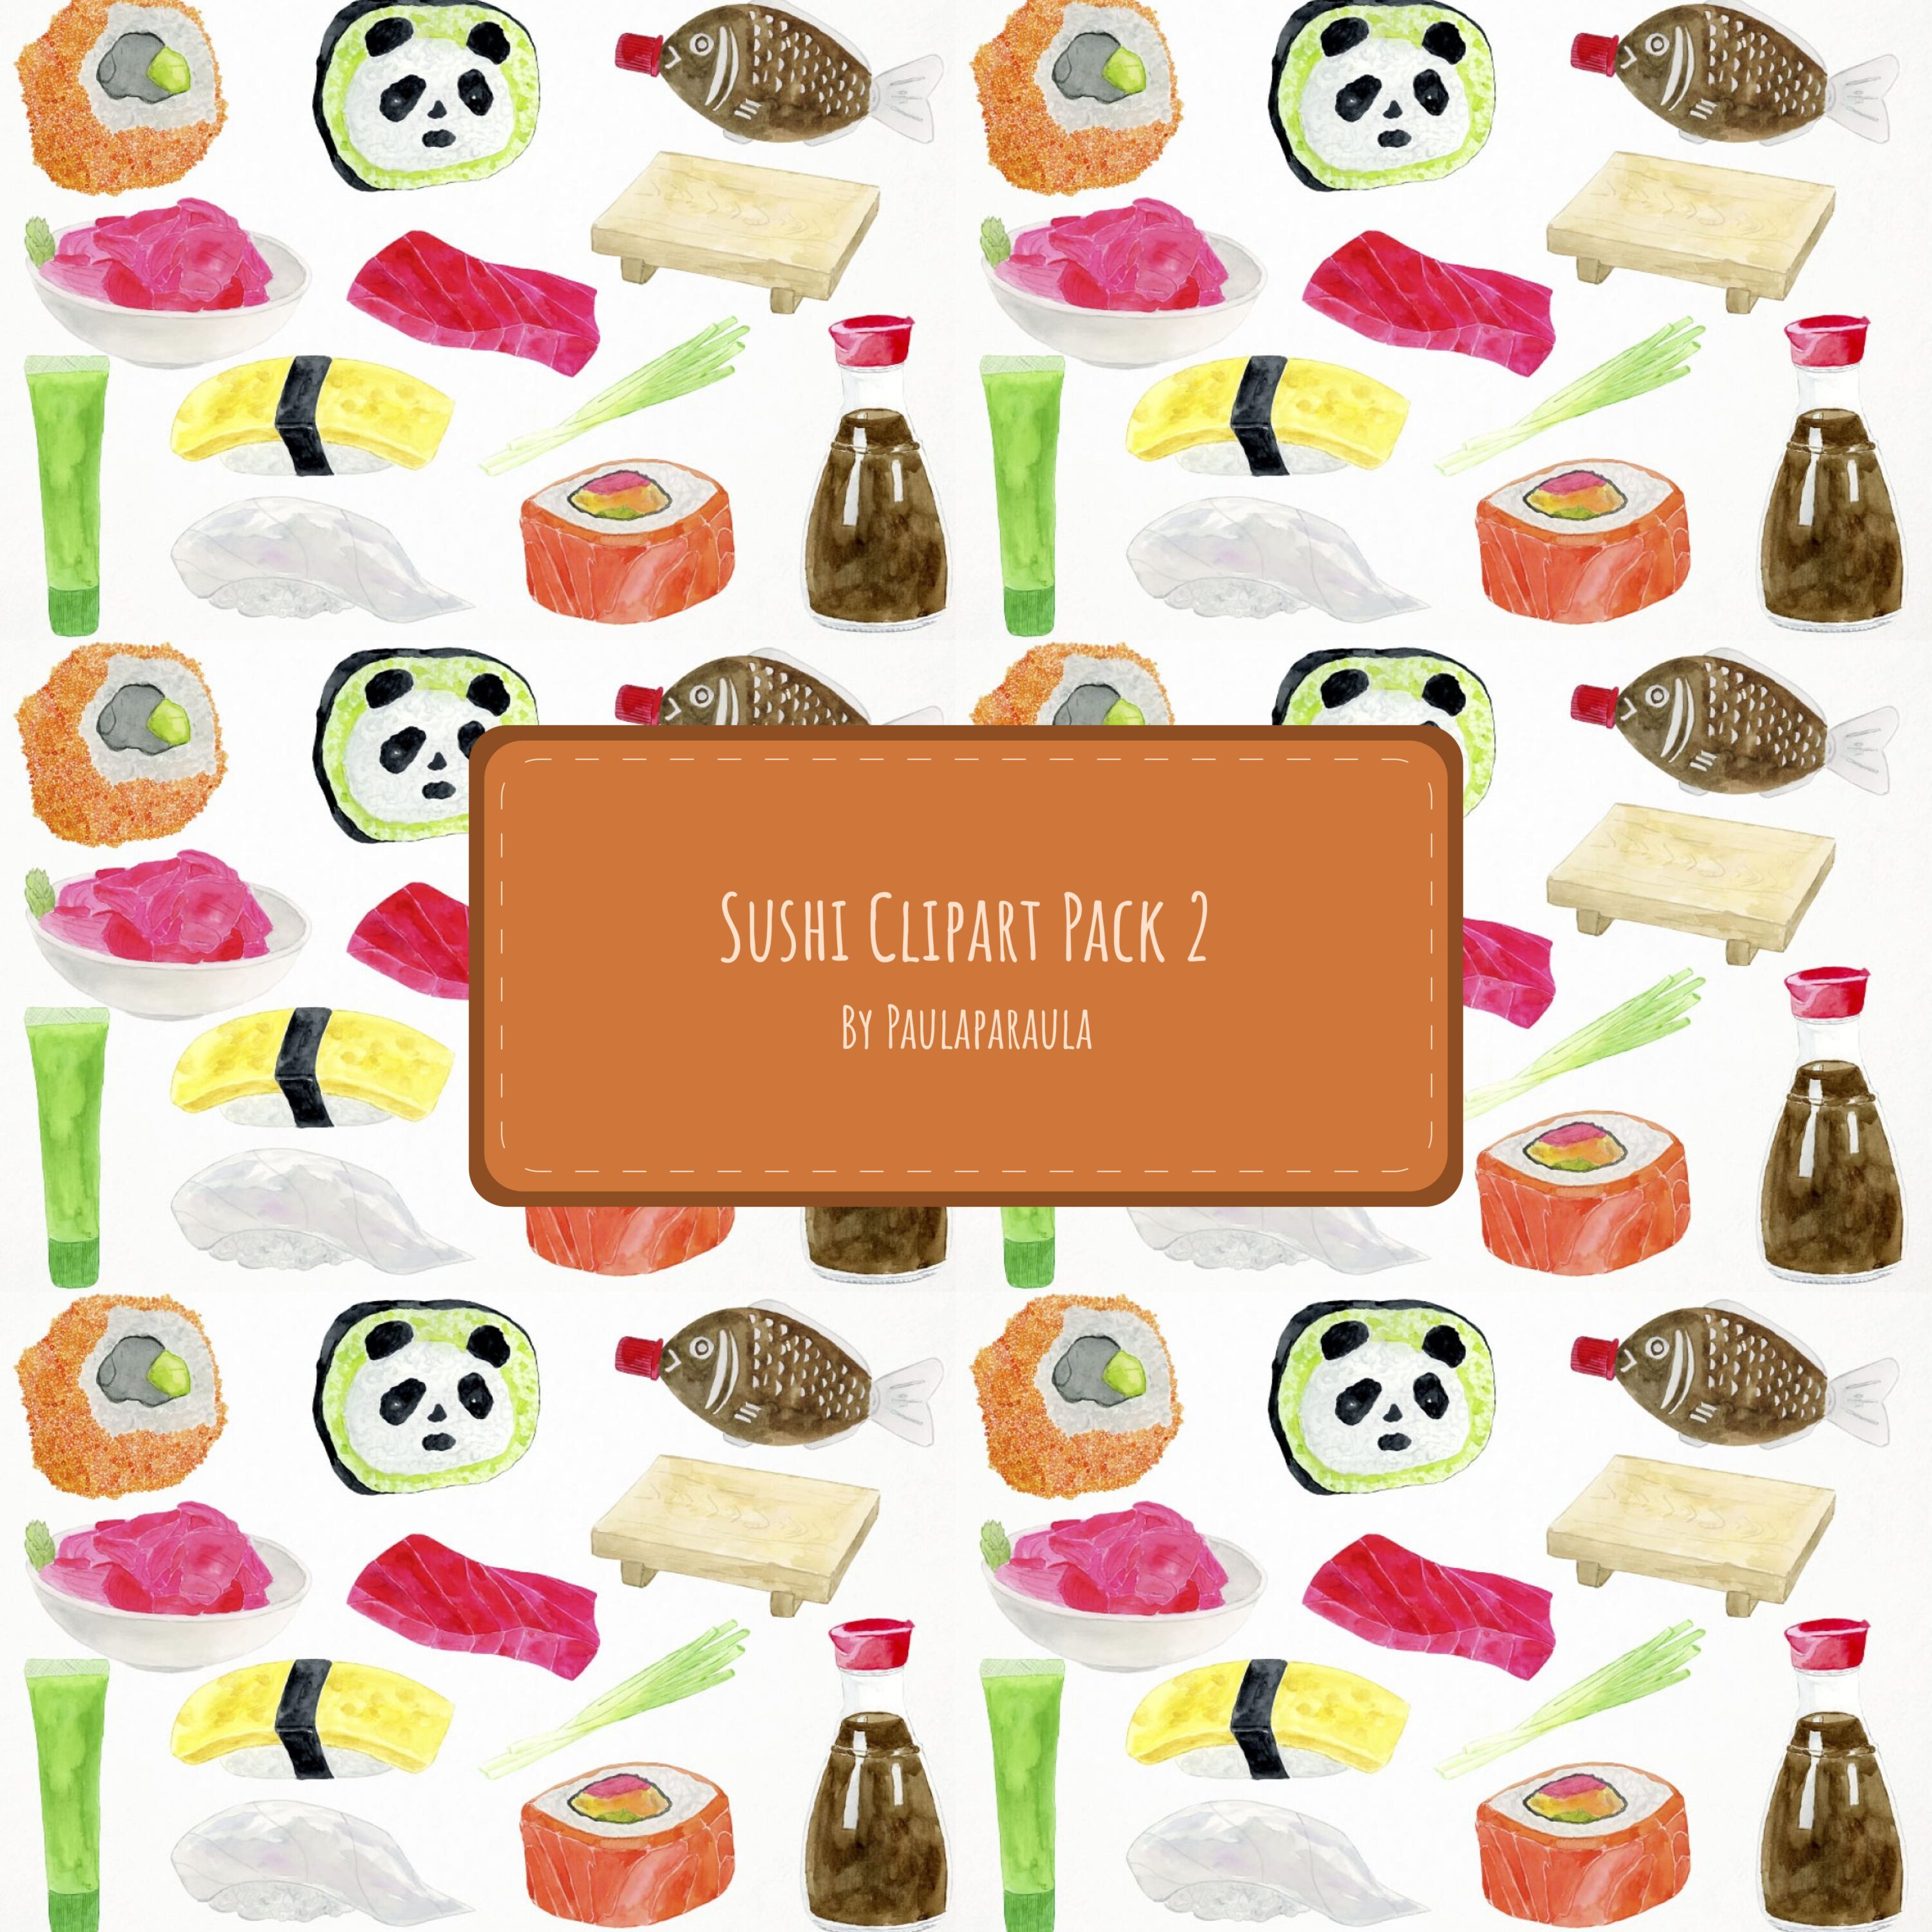 Sushi Clipart Pack 2 cover.